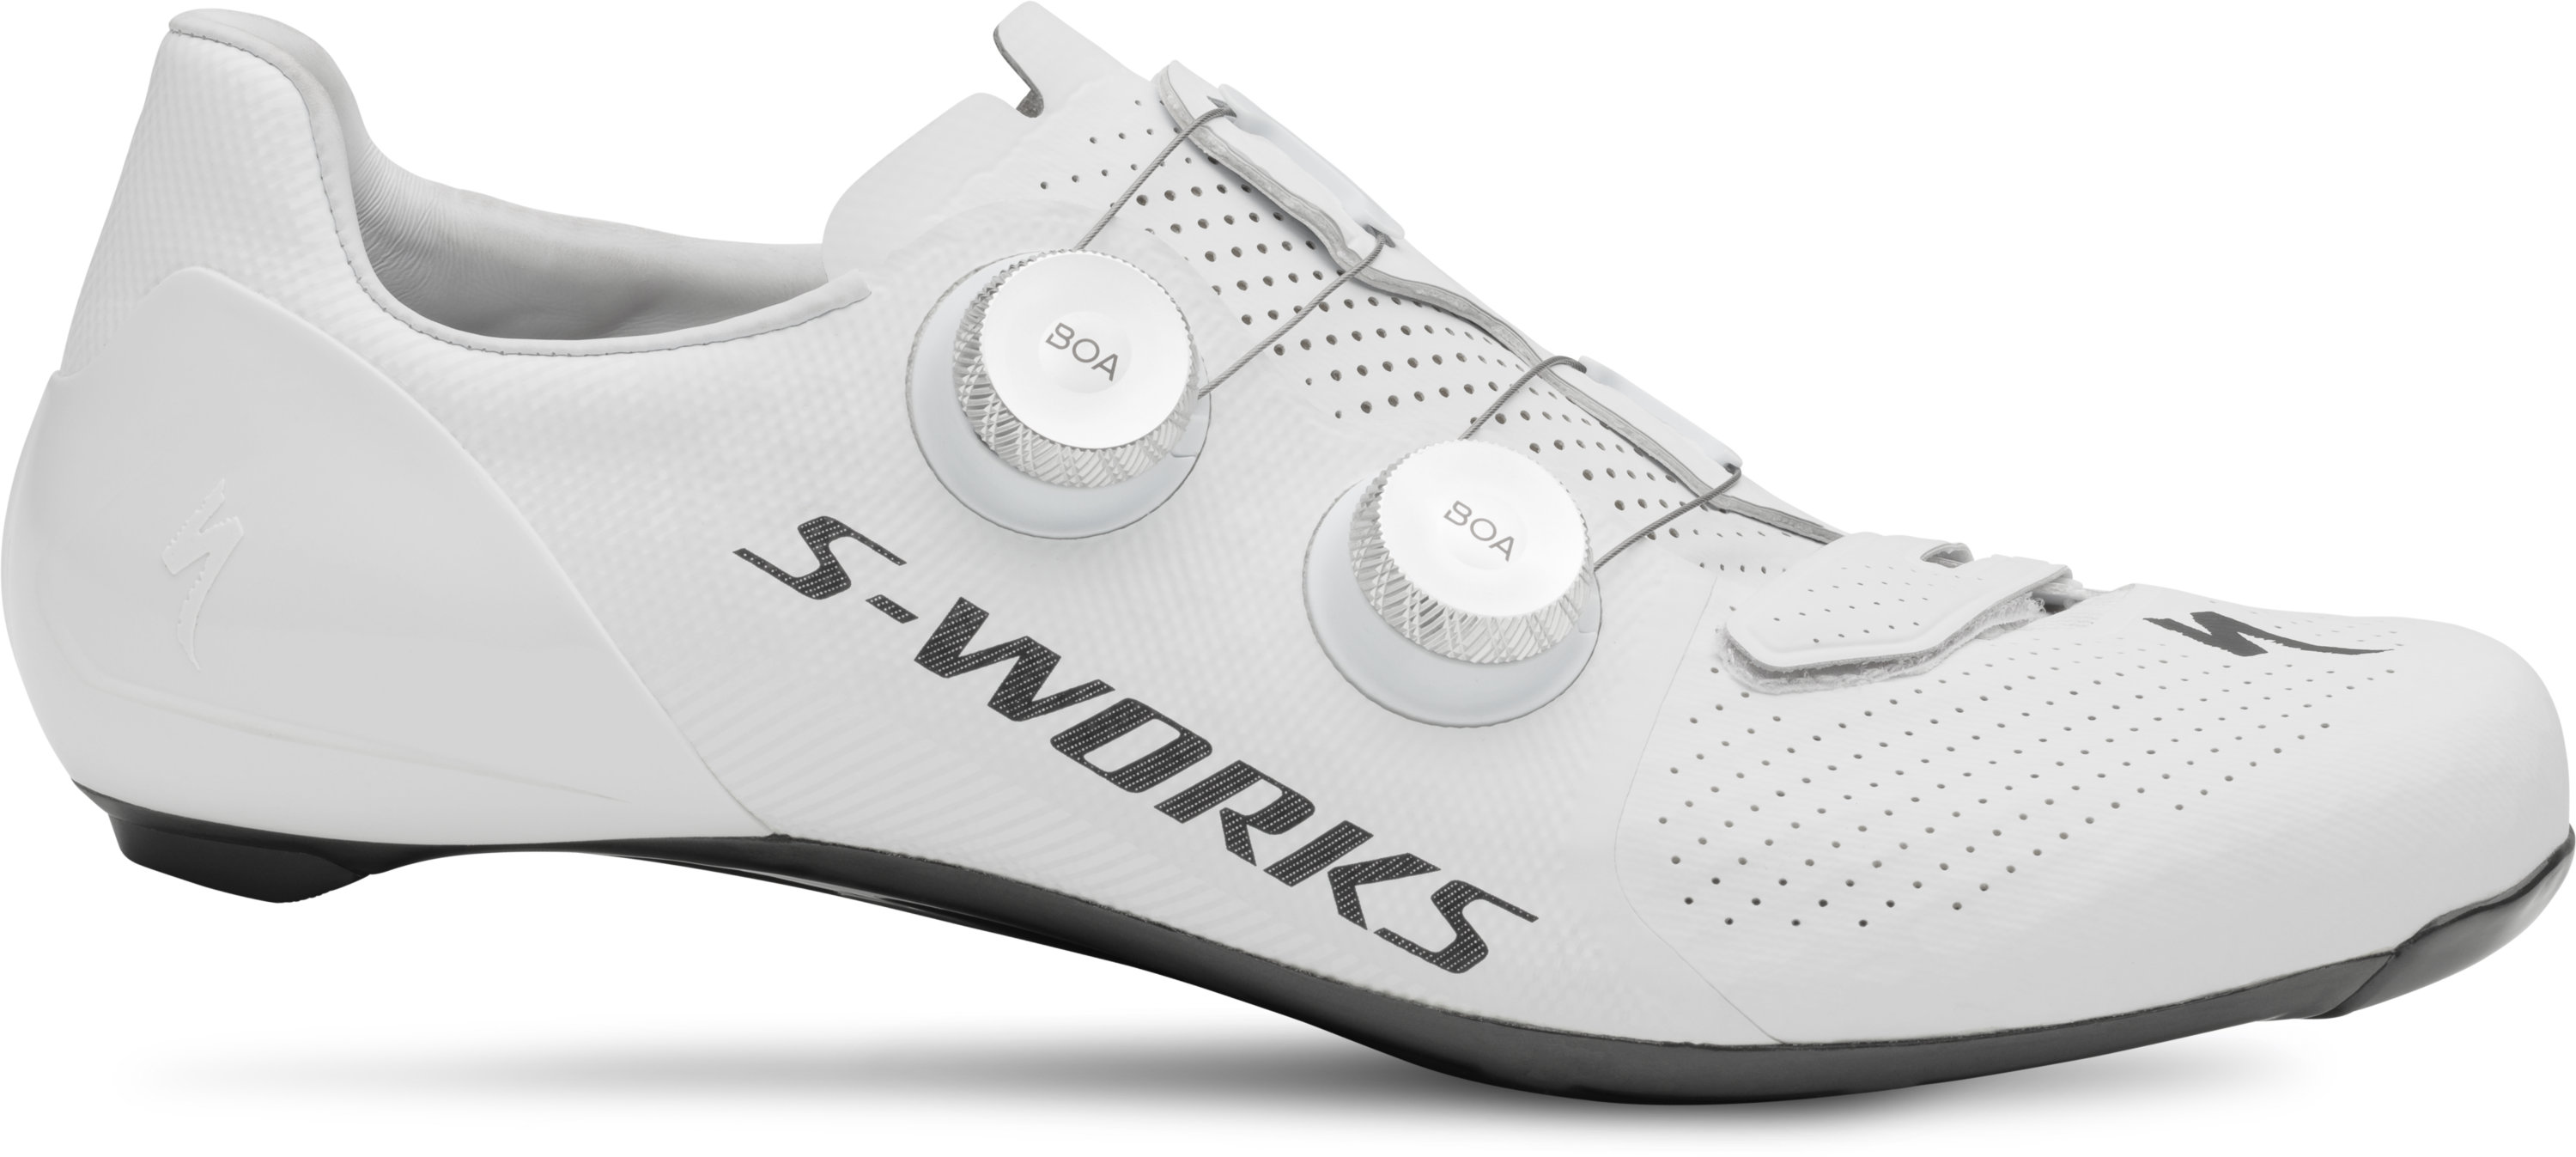 S-Works 7 |